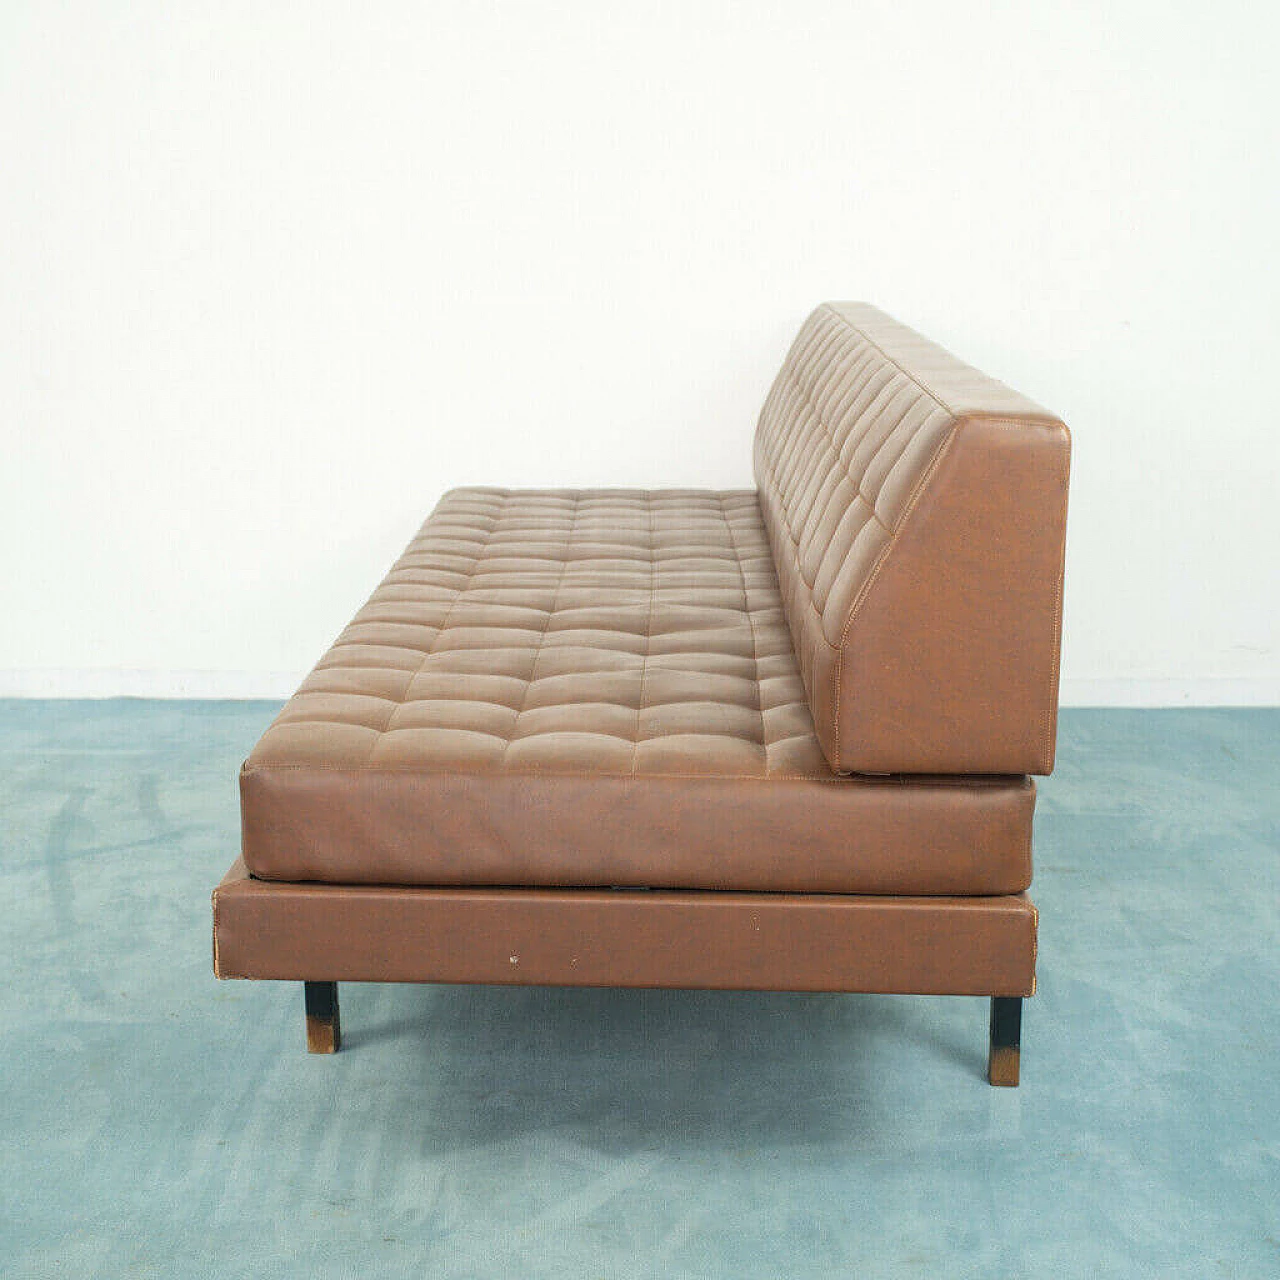 3-Seater sofa or daybed by Marco Zanuso for Flexform, 1950s 1183335